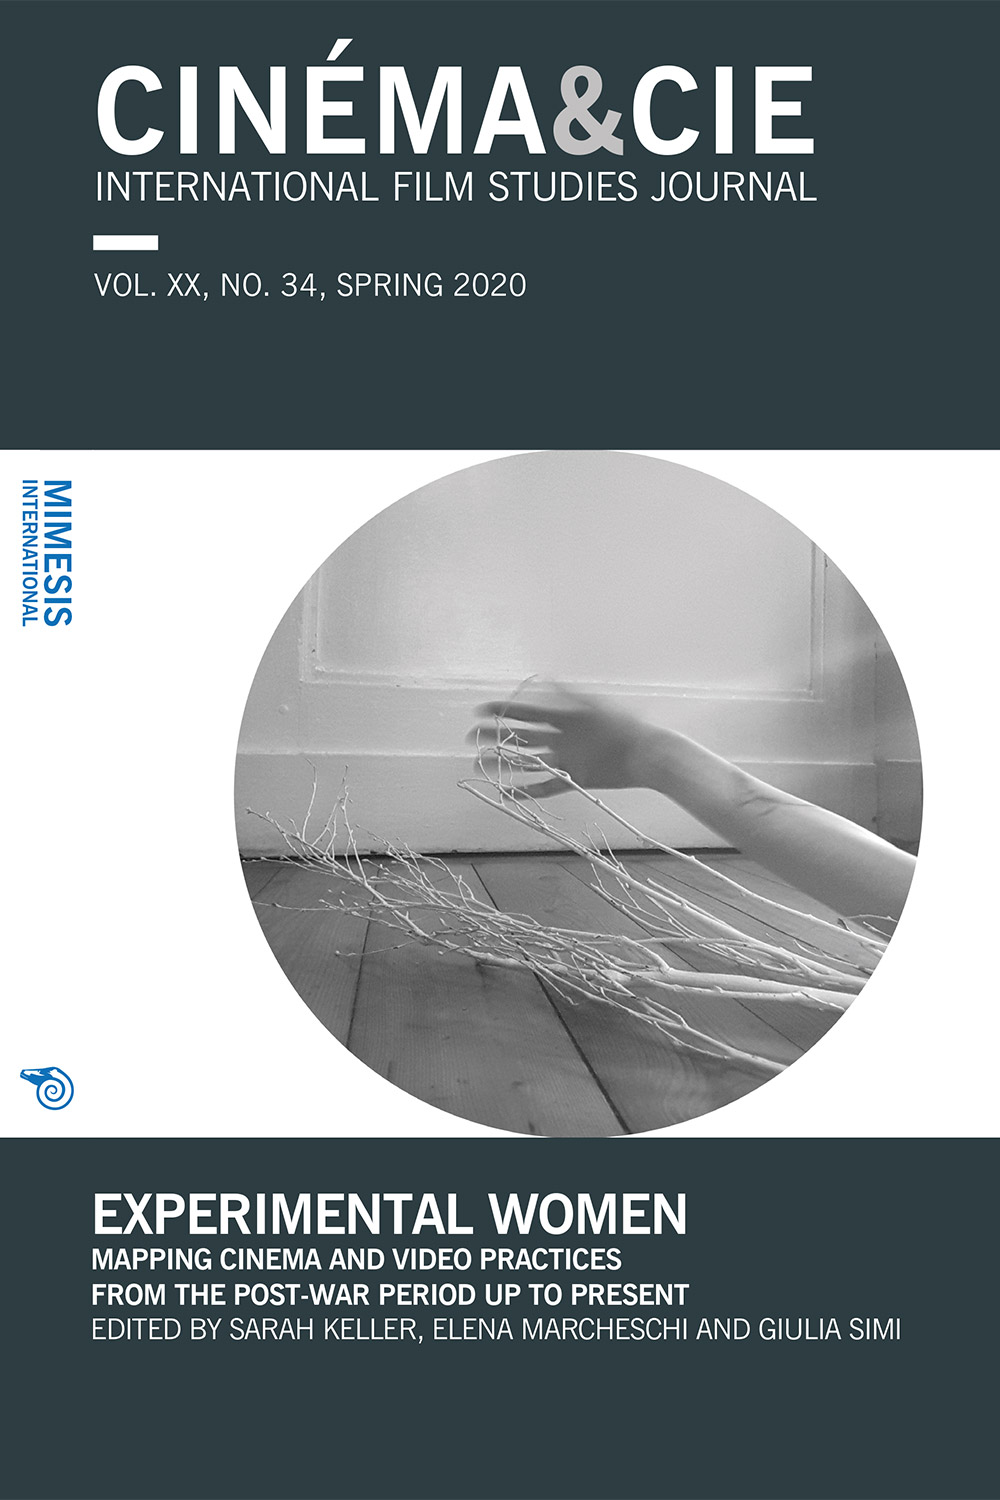 Cinéma&Cie 34: Experimental Women. Mapping Cinema and Video Practices From the Post-war Period Up to Present